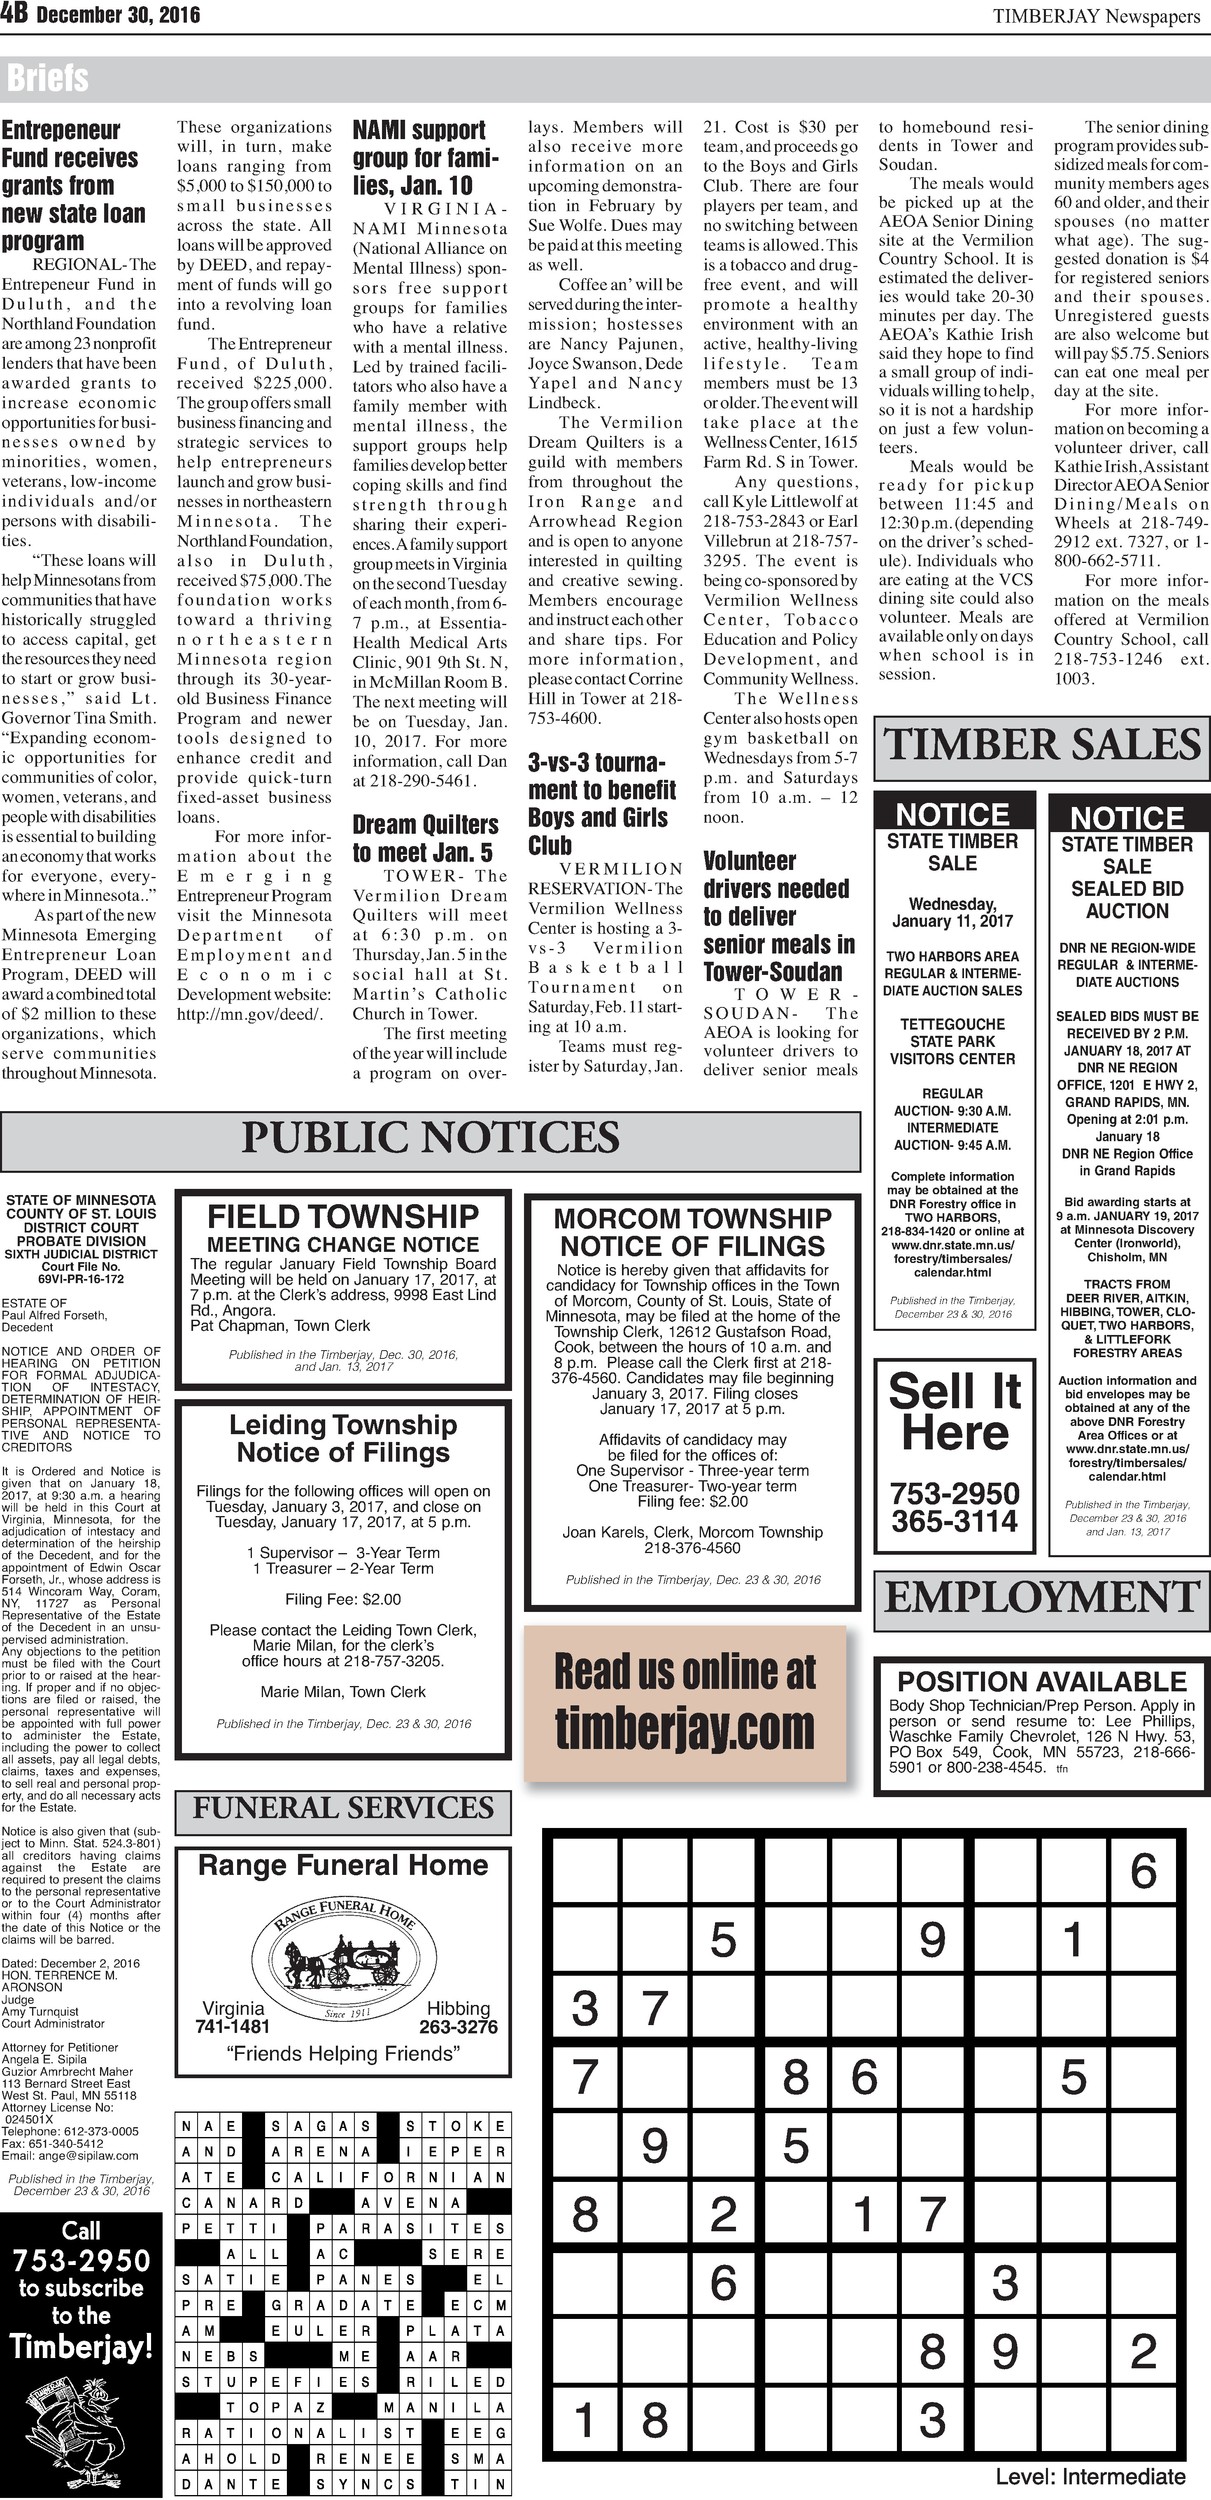 Click here to view the legal notices and classifieds from page 4B